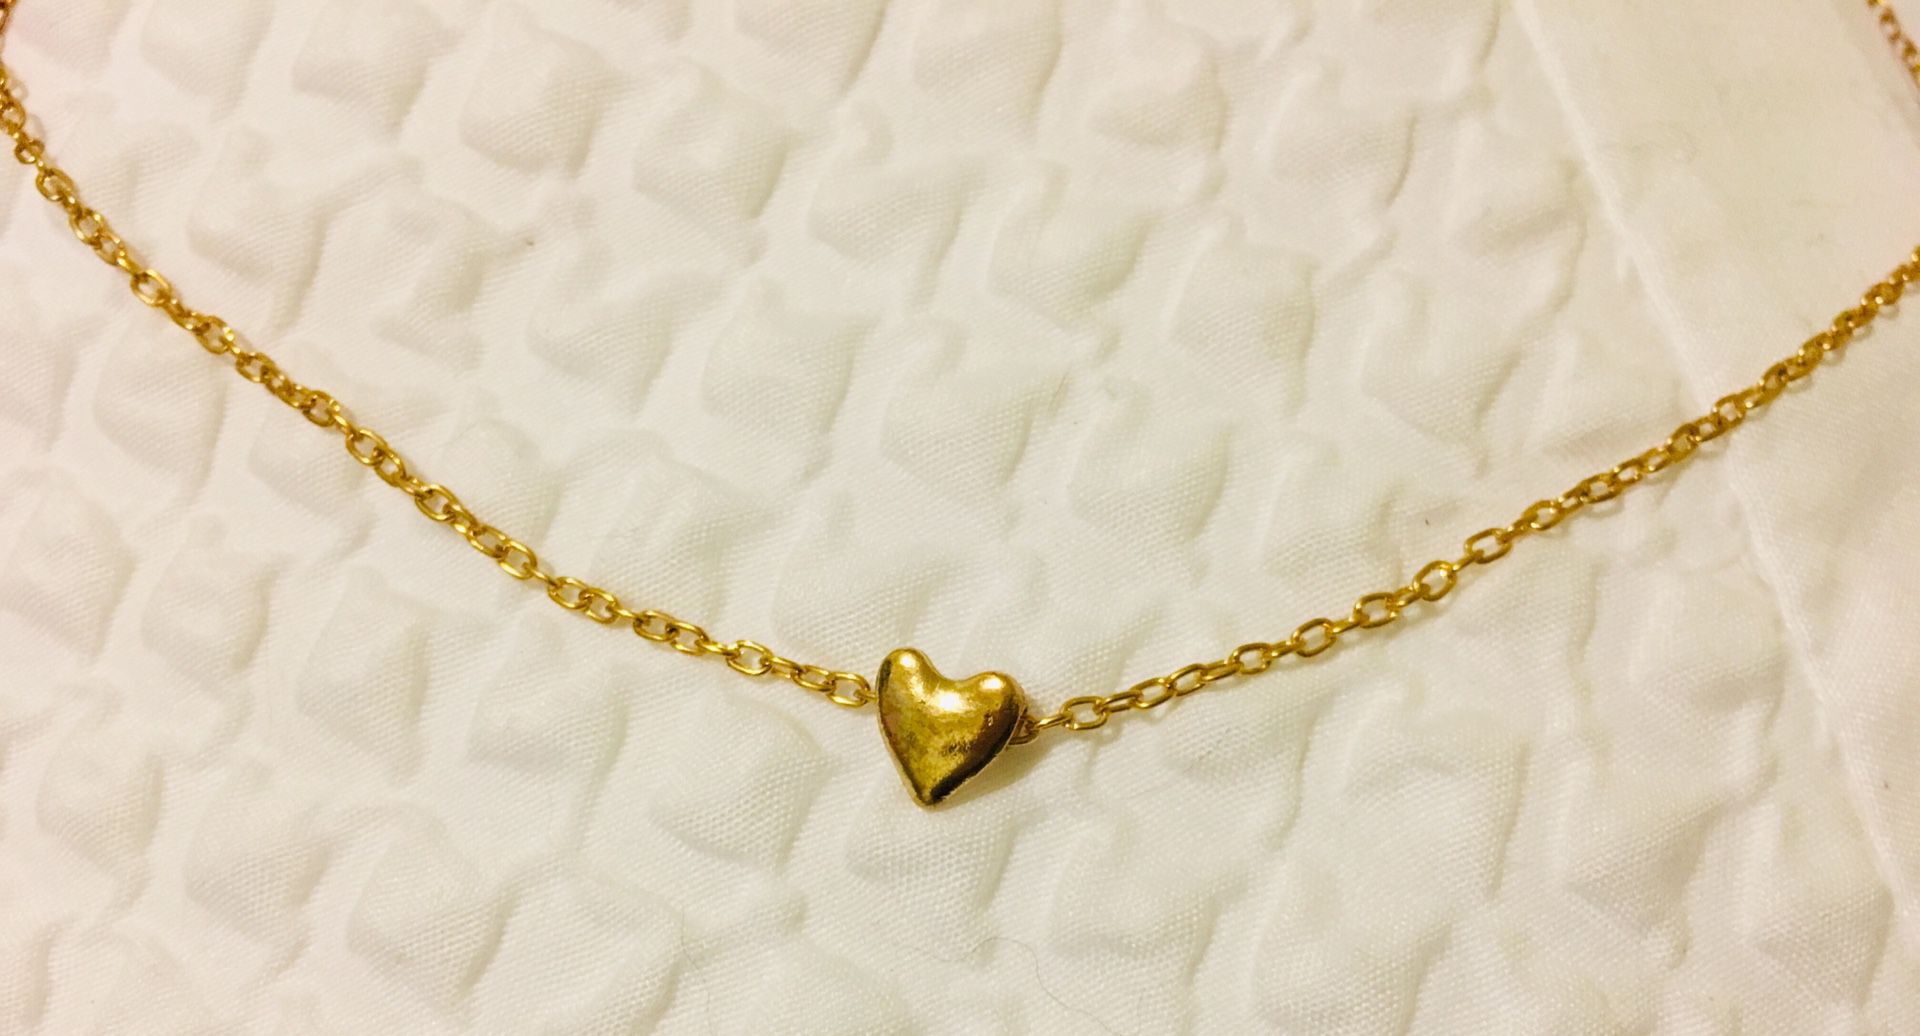 BRAND NEW WT GOLD SALE HEART CHARM W/NECKLACE W/TAGS